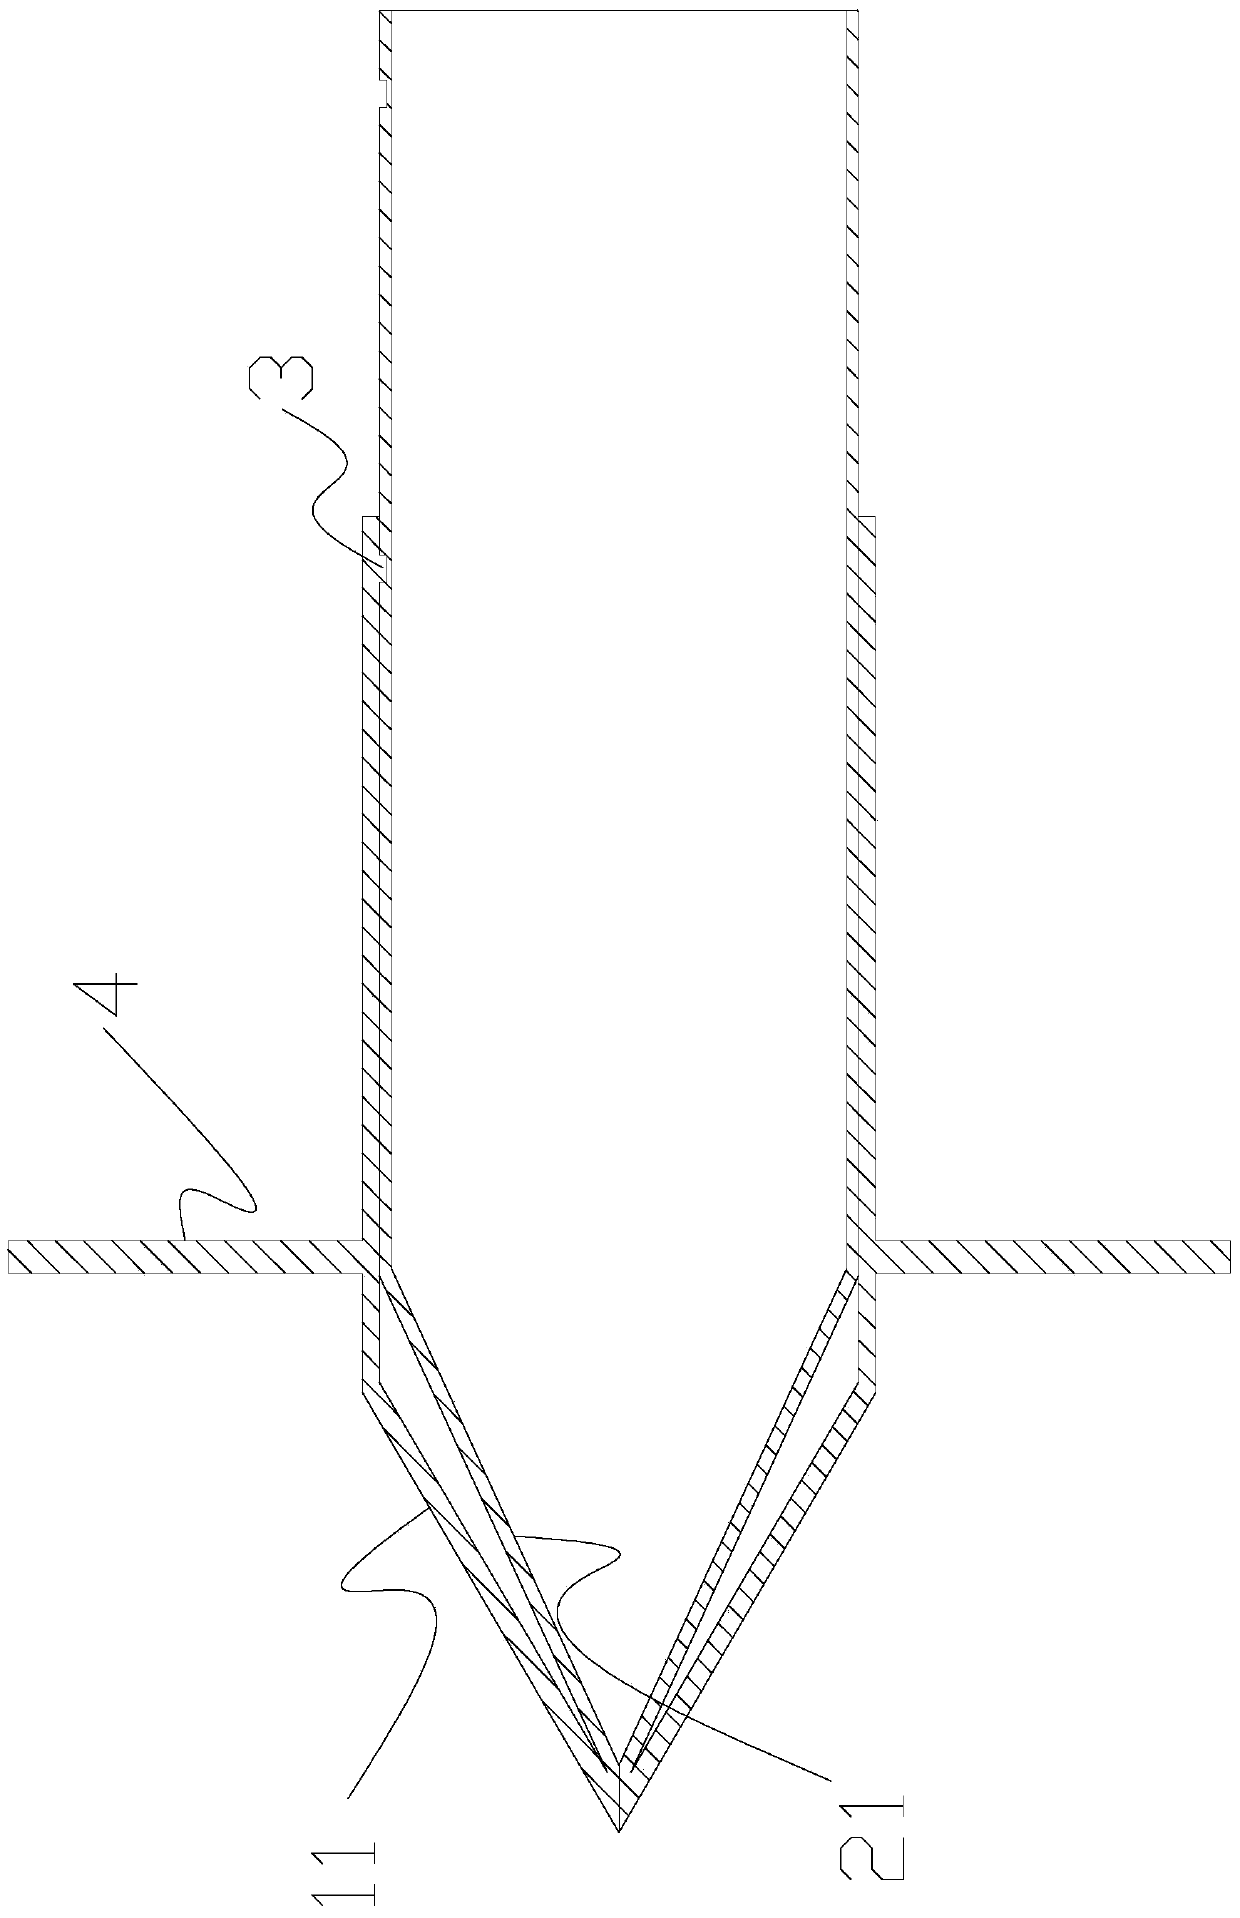 Wall tissue puncture fixation device